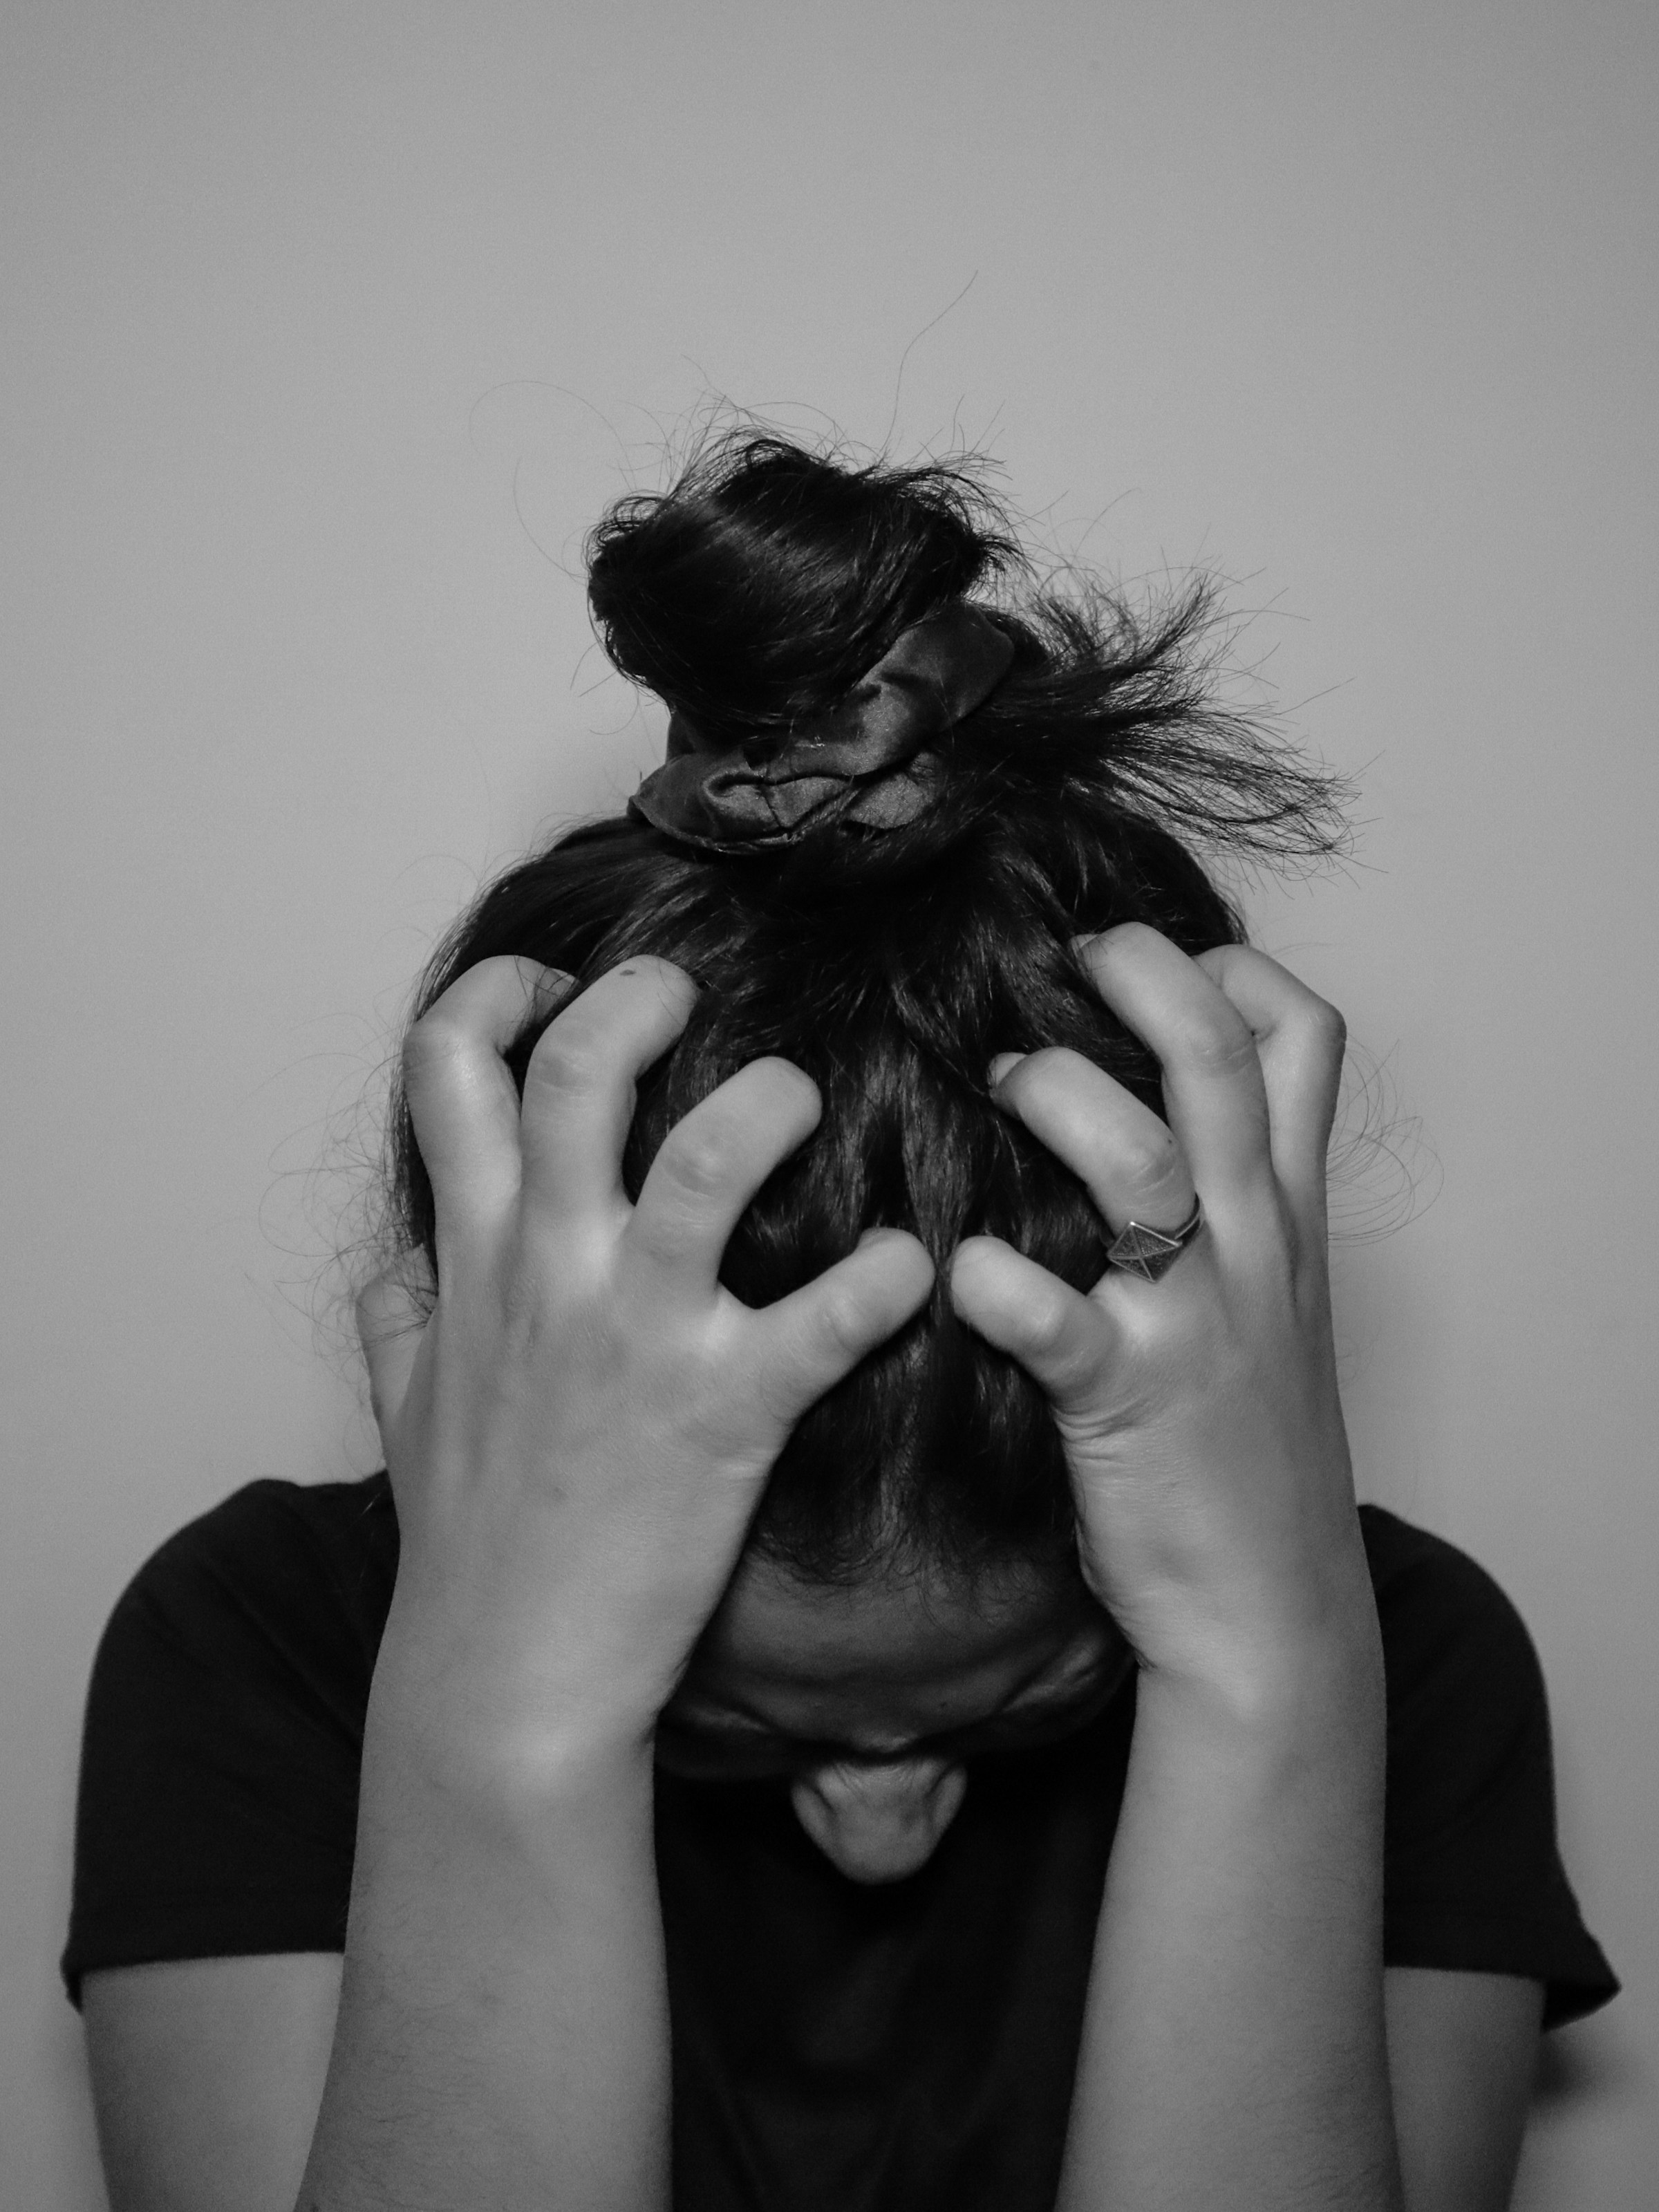 A woman holding her head | Source: Unsplash